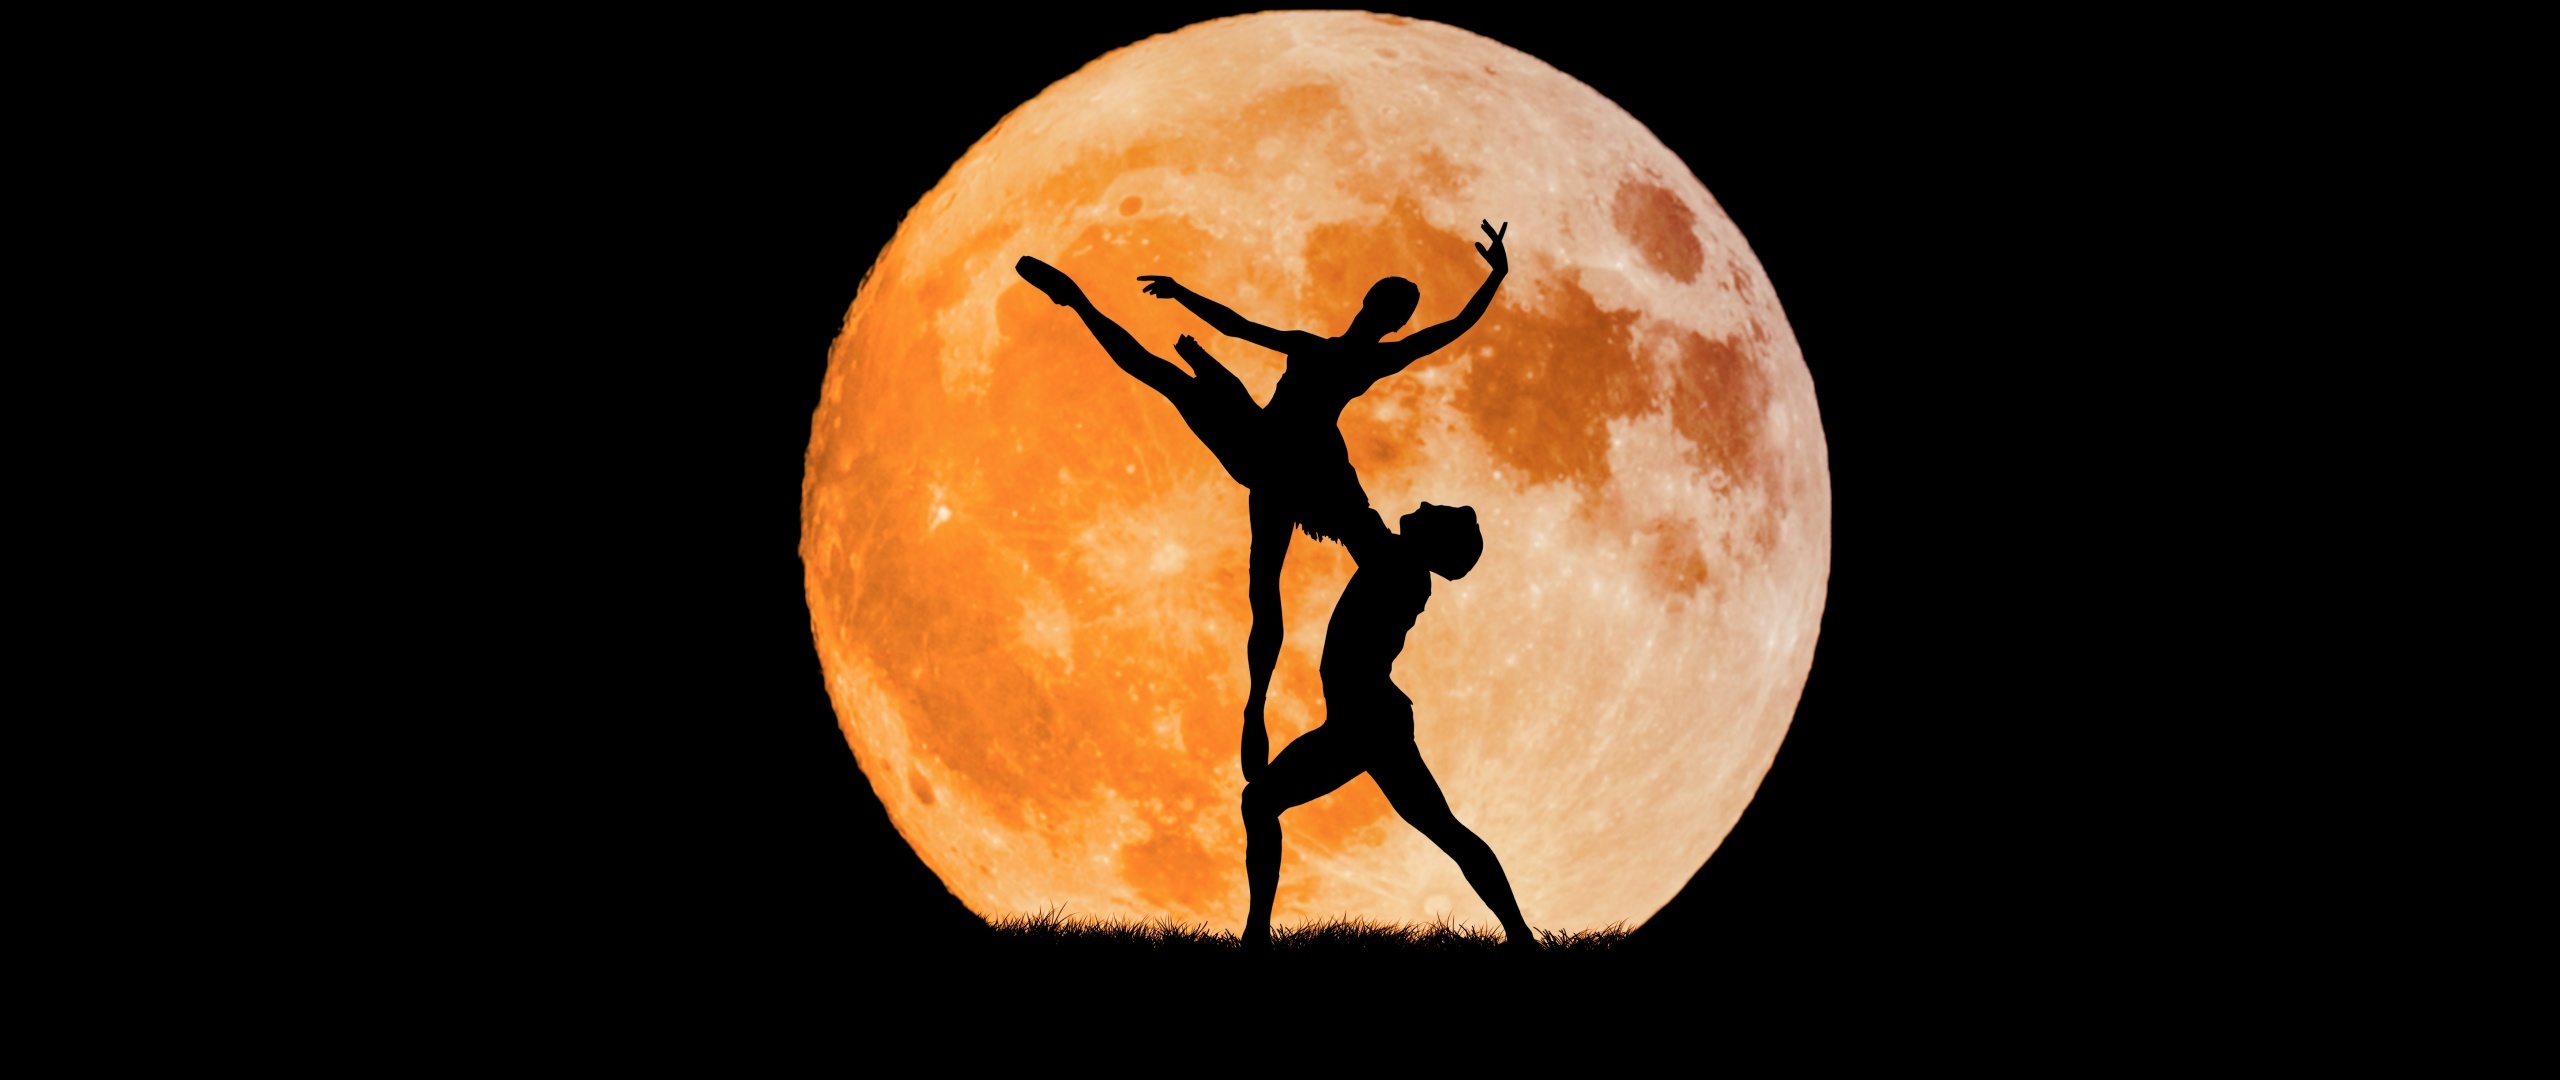 Ballet: Couple dancers, Full moon, Silhouette. 2560x1080 Dual Screen Background.